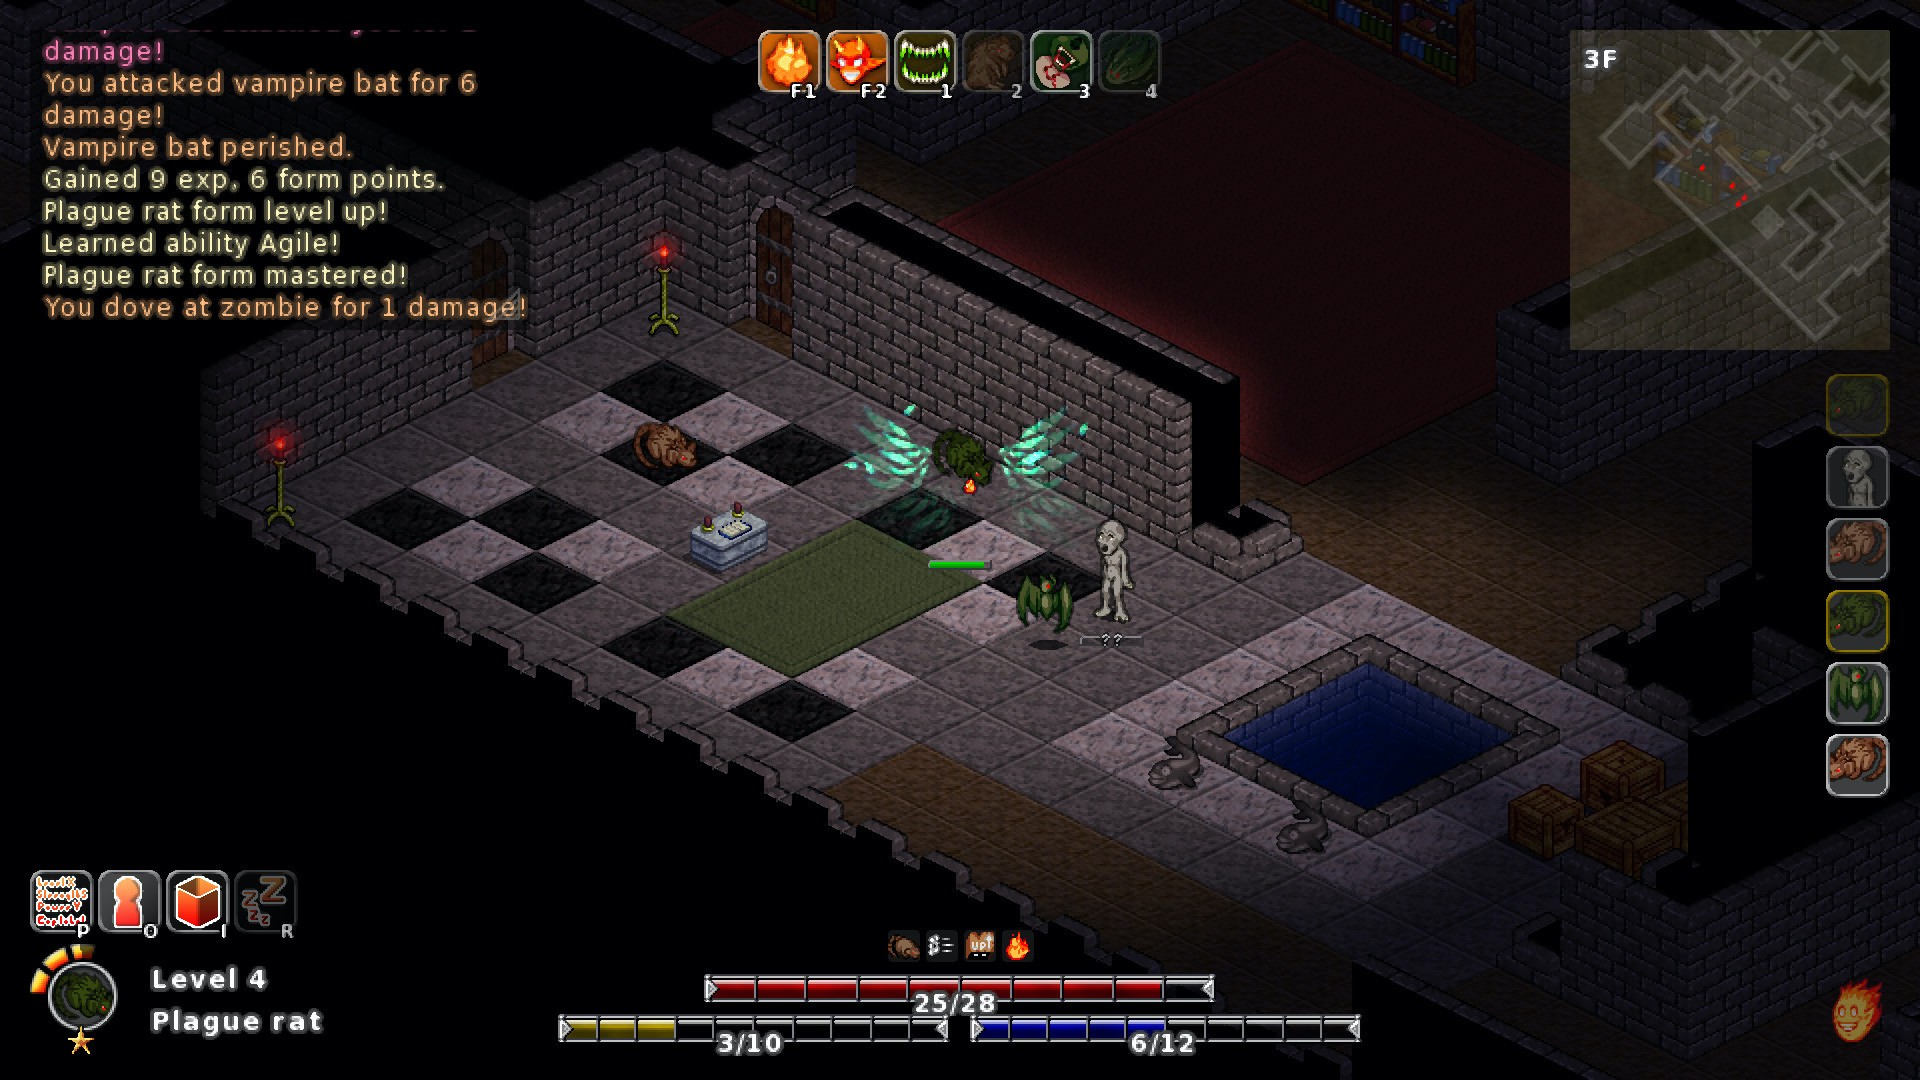 casual, General, indie, Kitsune Games, MidBoss, MidBoss Review, PC, PC Review, Roguelike, Role Playing Game, RPG, strategy, Traditional Roguelike, turn-based